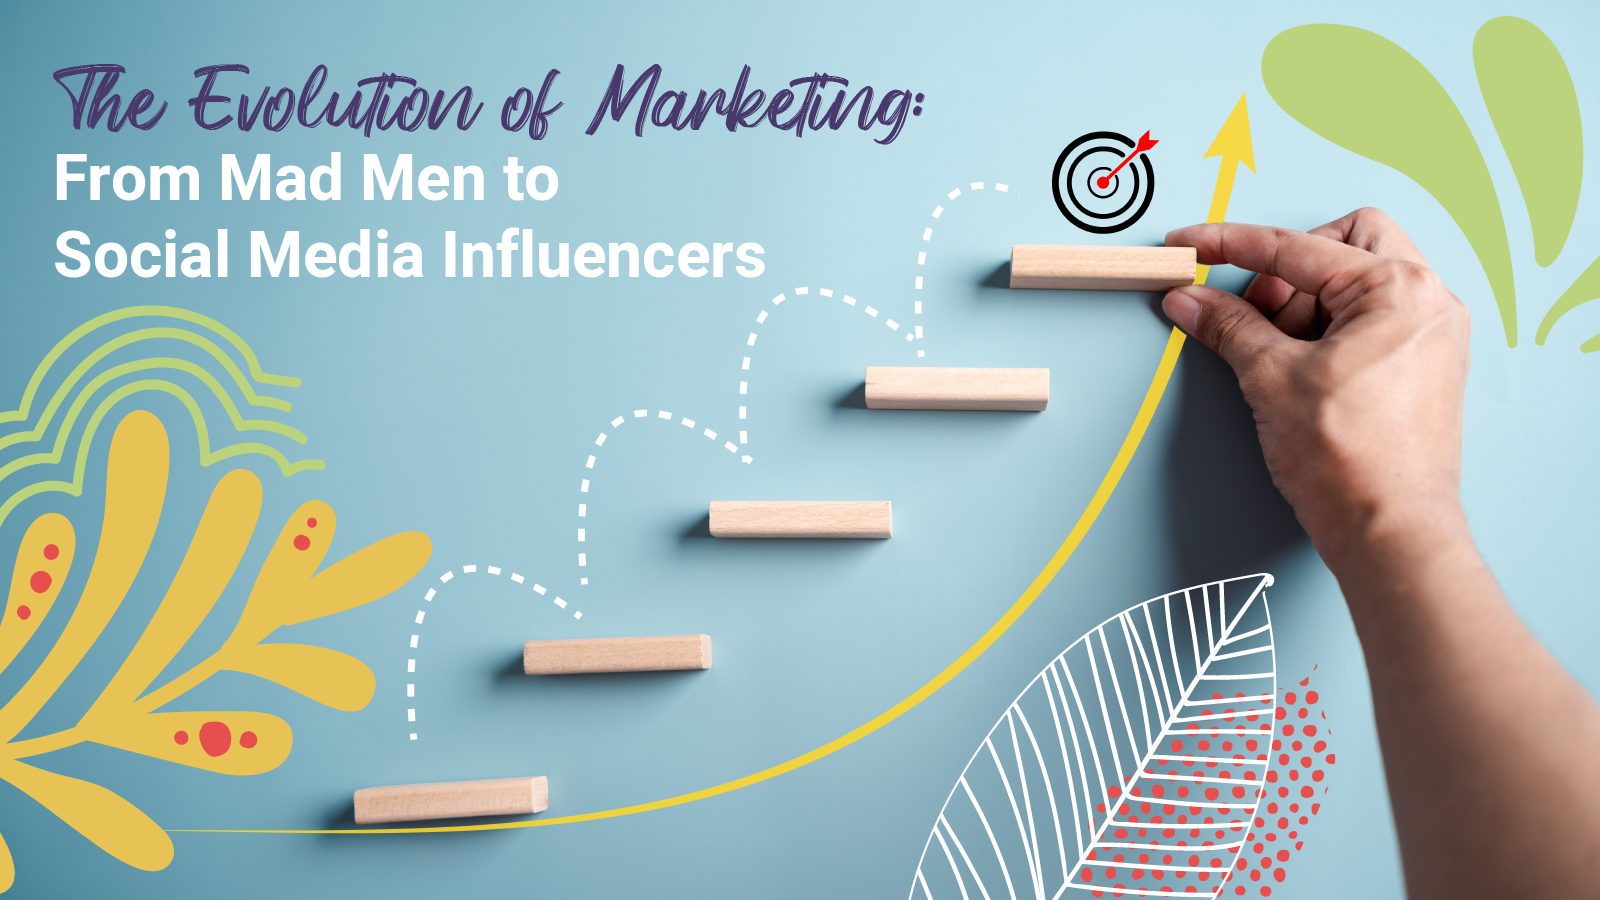 A ball bounces up several platforms "The Evolution of Marketing From Mad Men to Social Media Influencers"